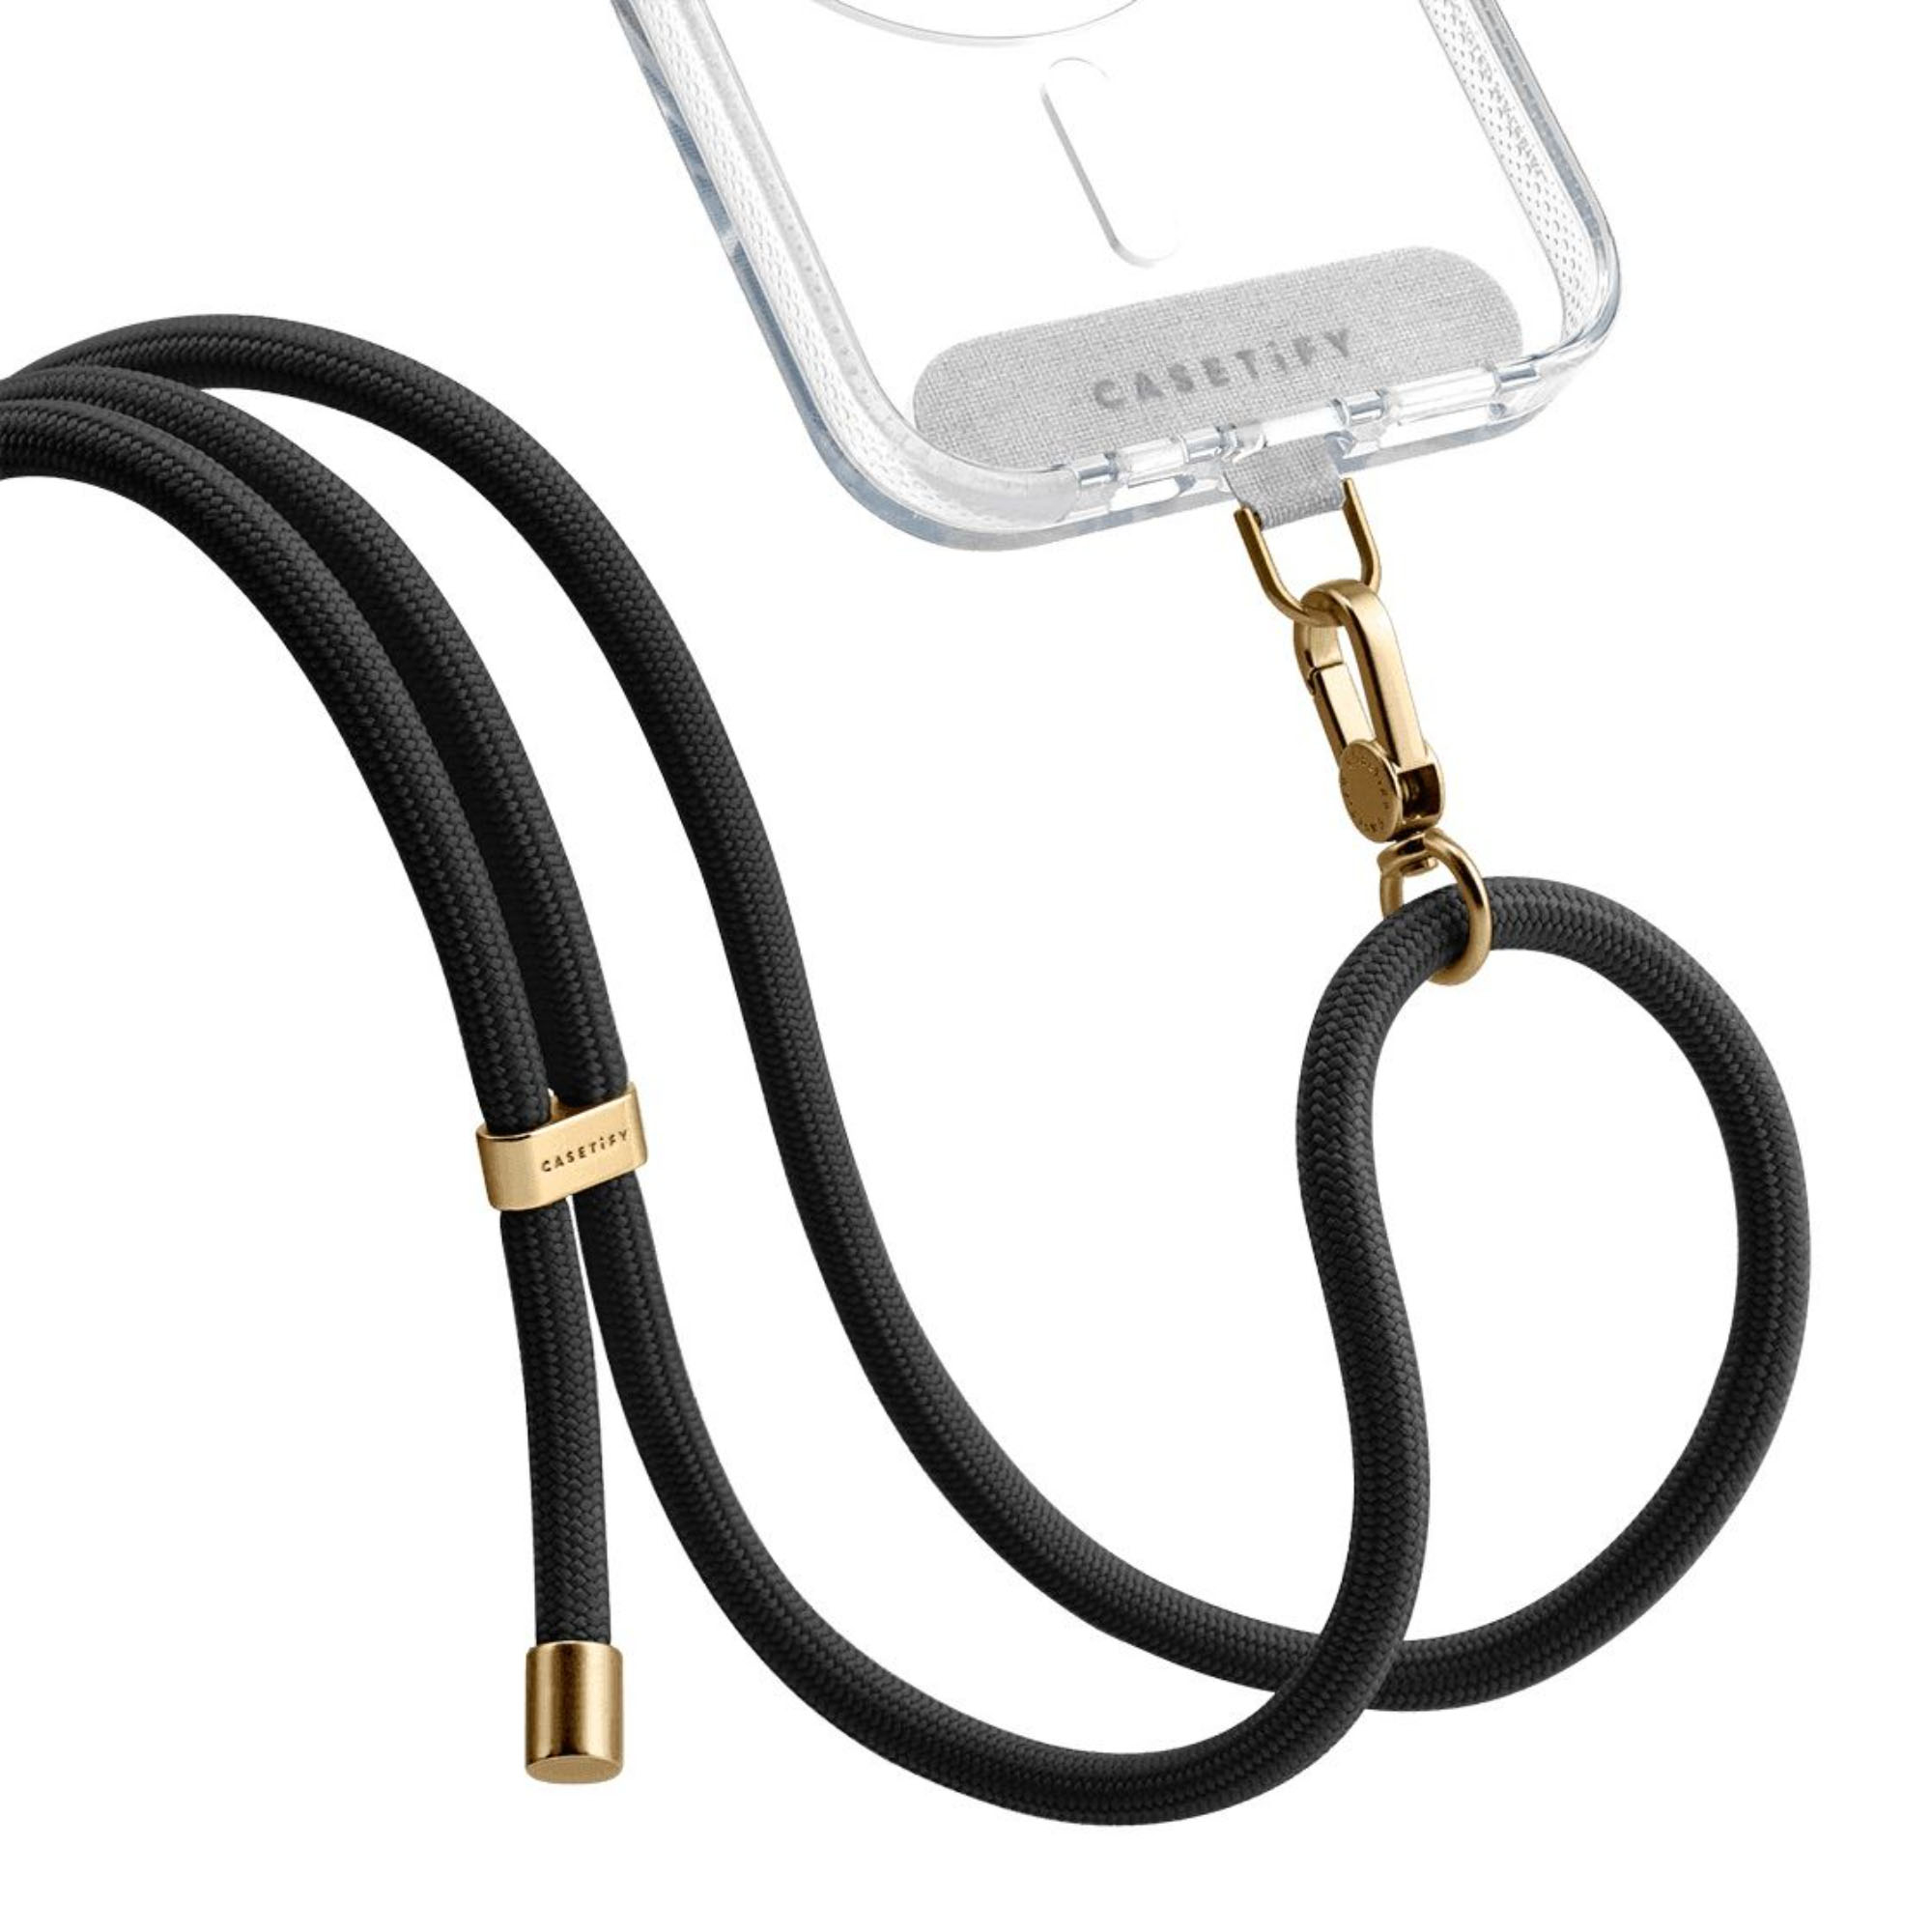 Angle View: CASETiFY - Rope Cross-body Phone Strap Compatible with Most Cell Phone Devices - Black/Gold